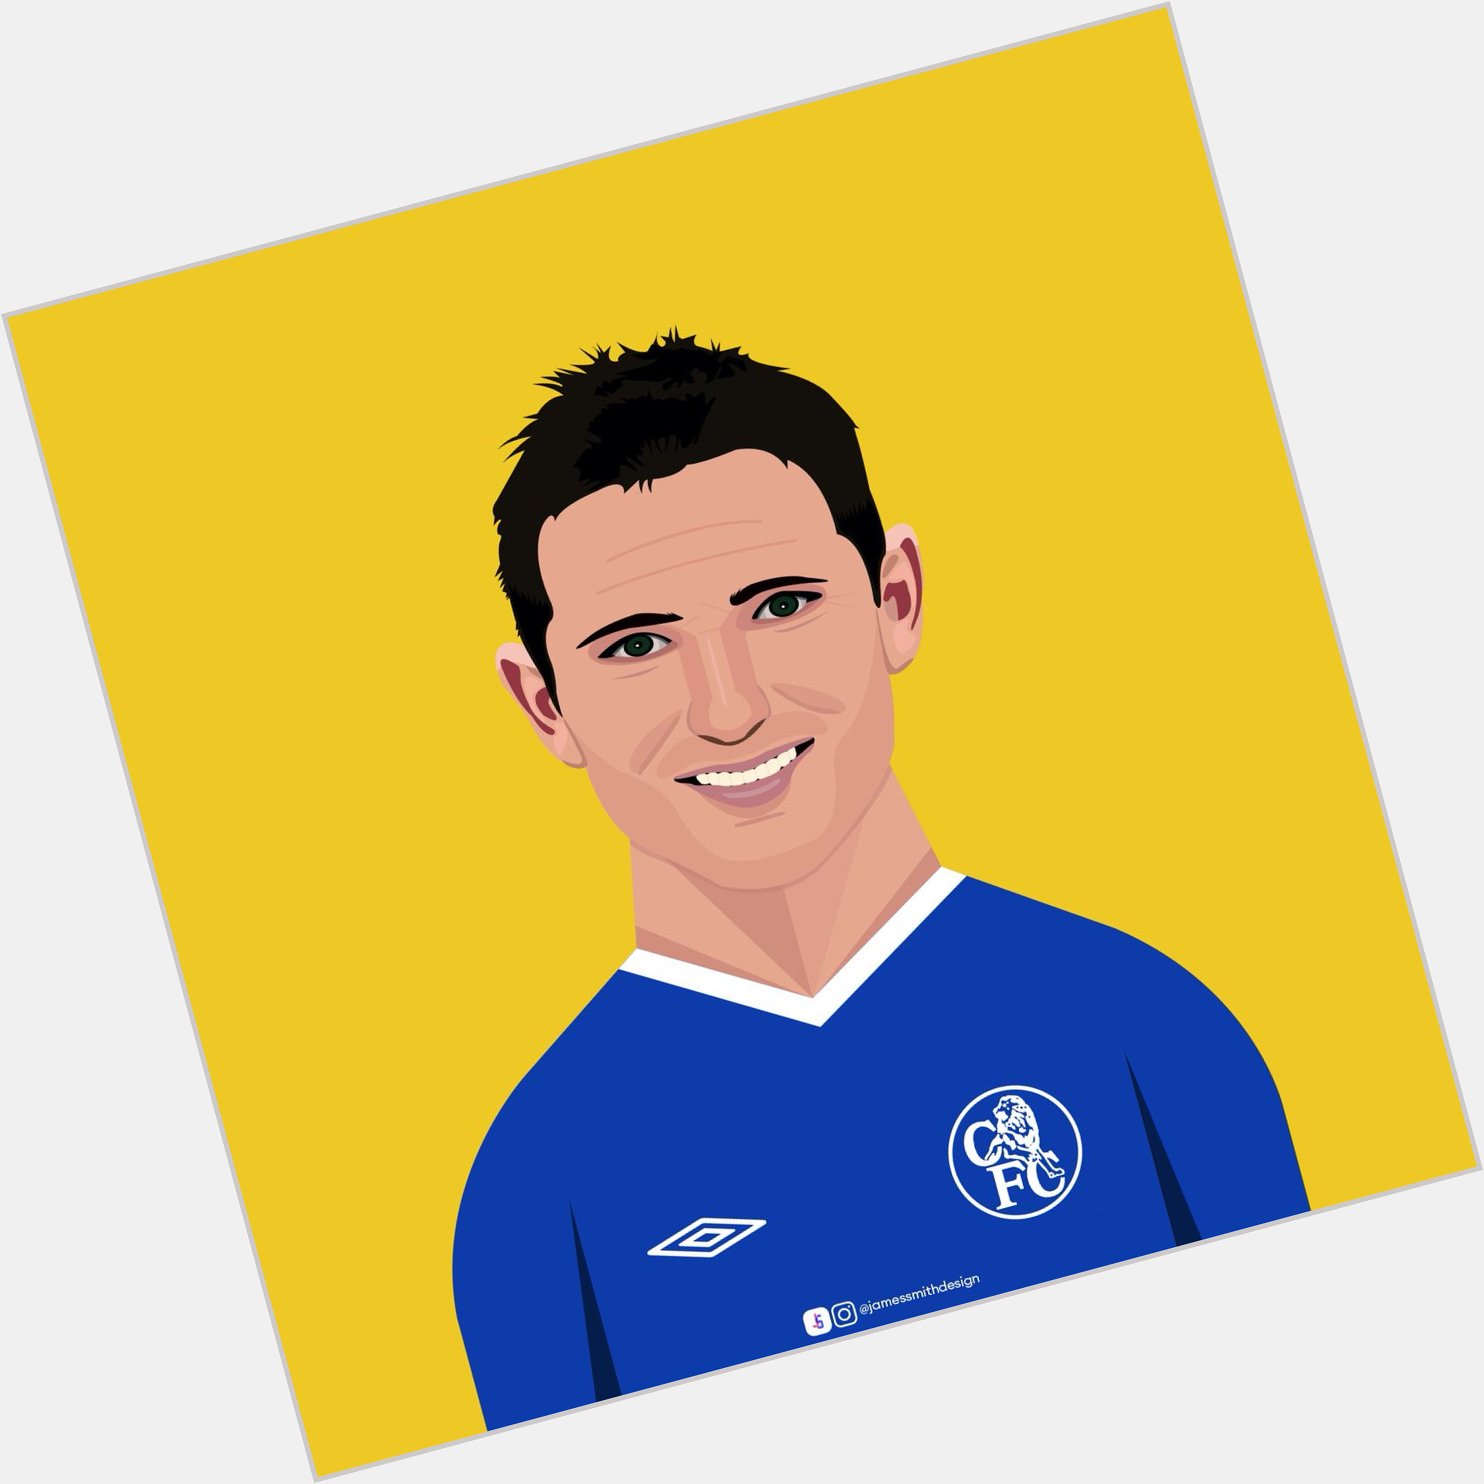 Happy birthday to super Frank Lampard, the greatest midfielder in epl history. 